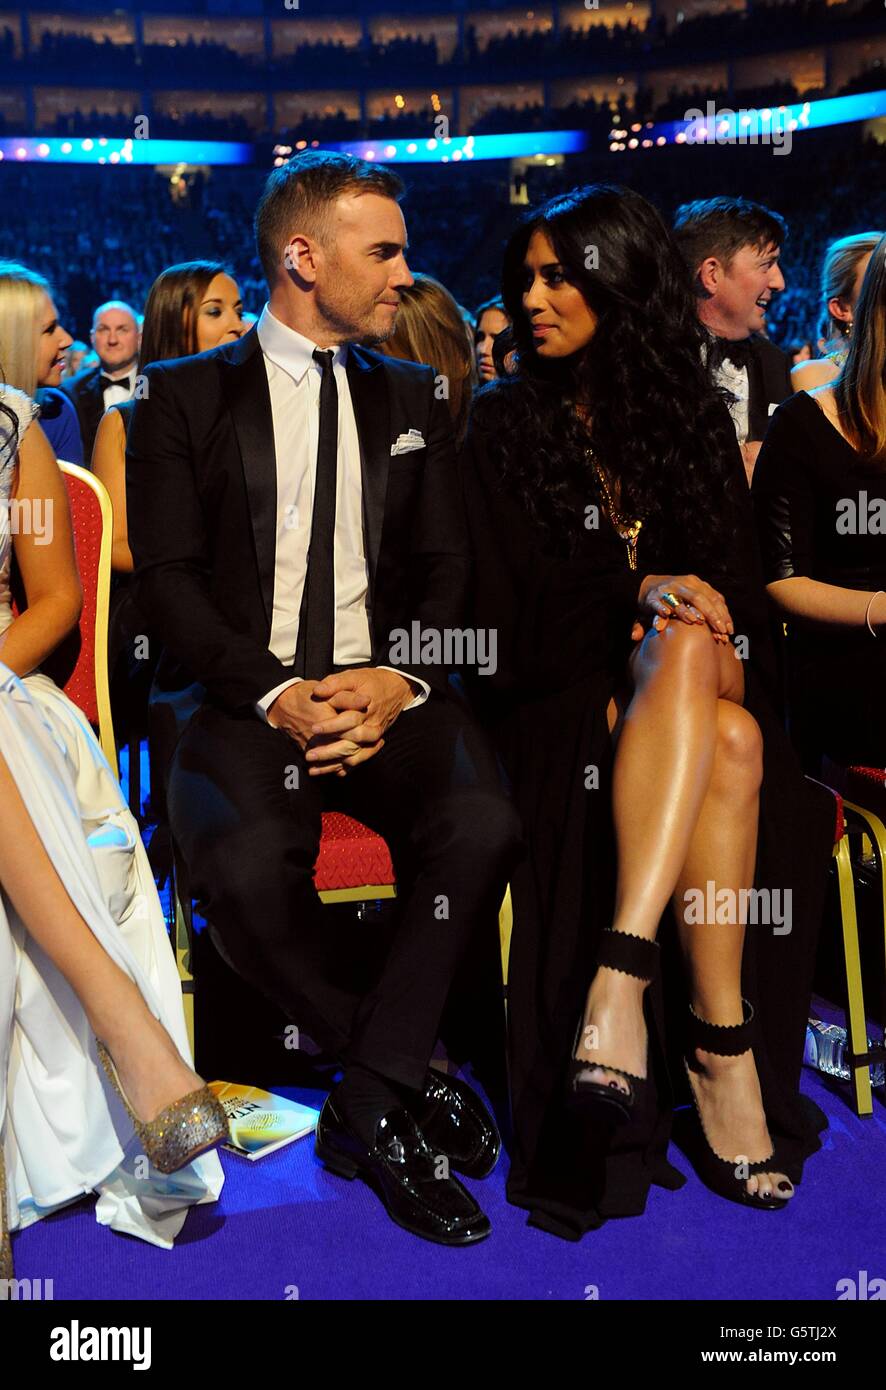 Gary Barlow and Nicole Scherzinger during the 2013 National Television